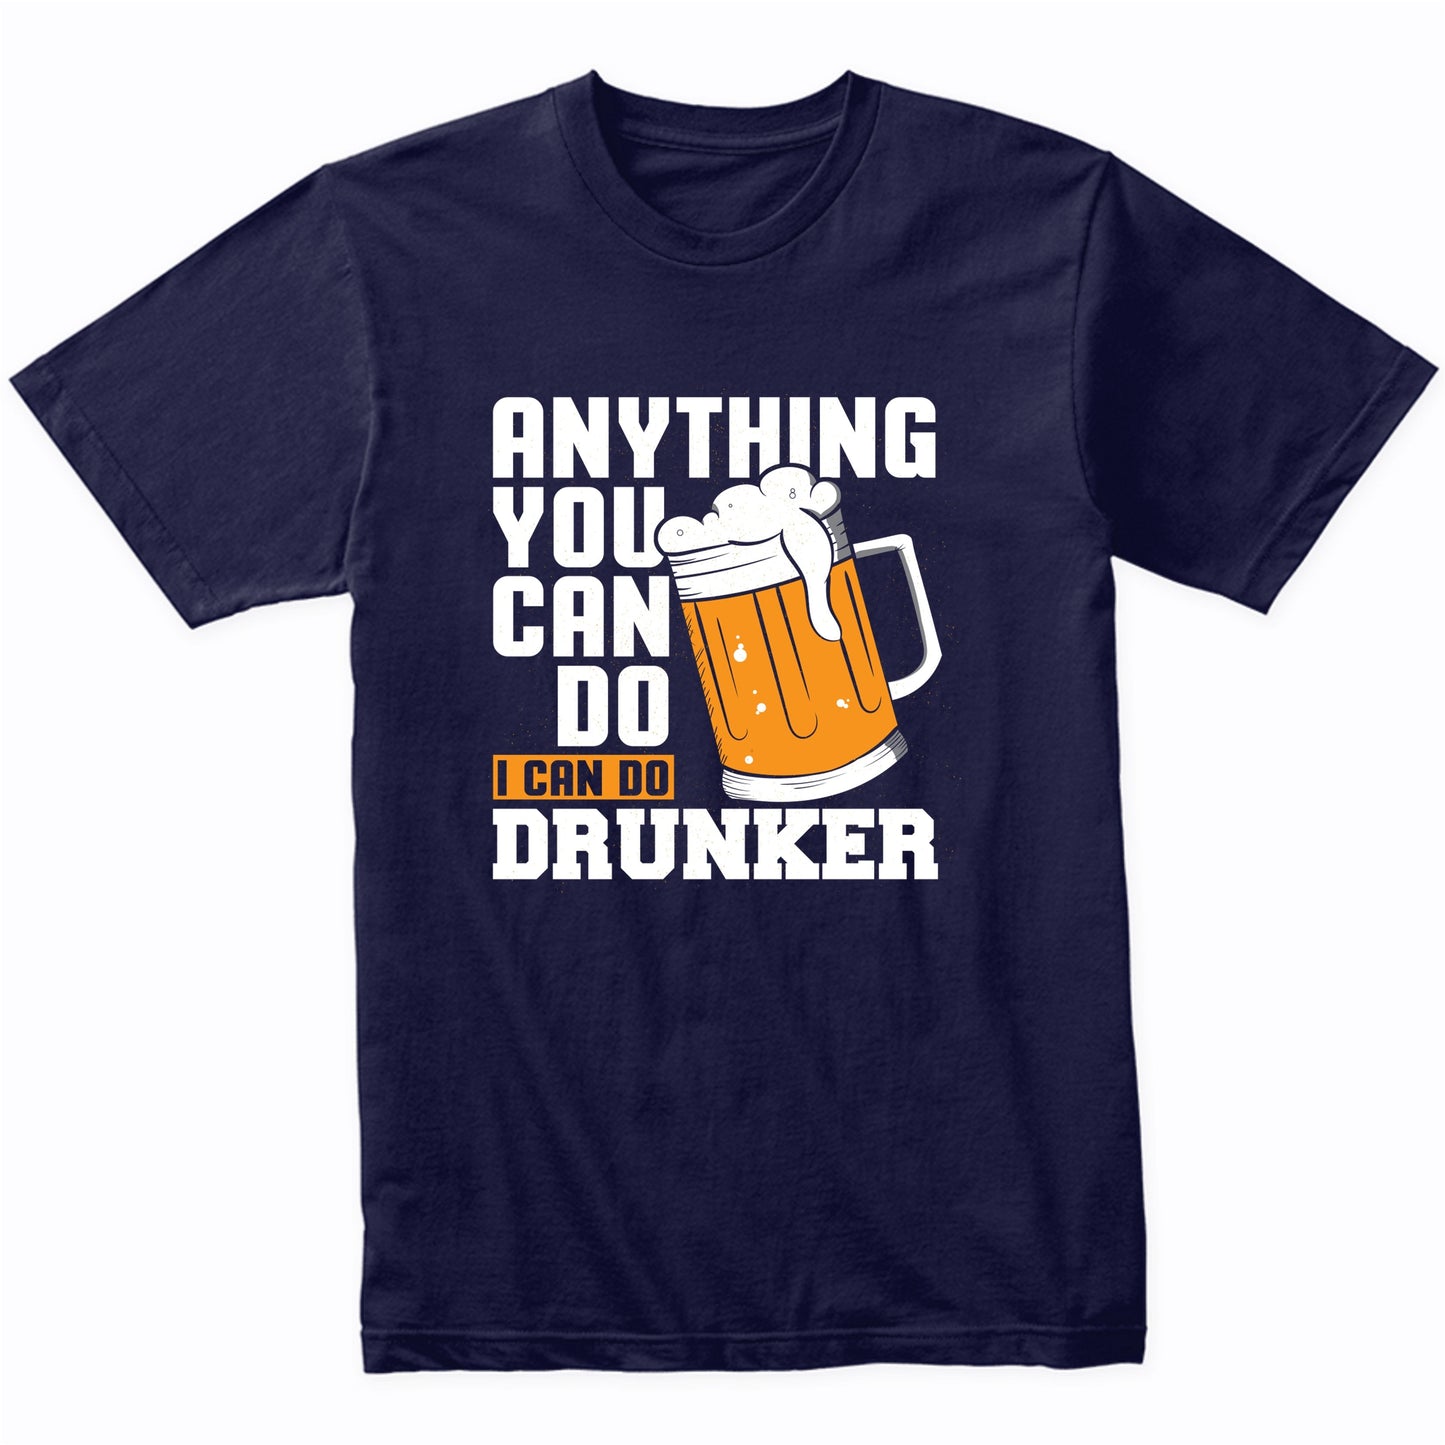 Anything You Can Do I Can Do Drunker Funny Drinking Shirt